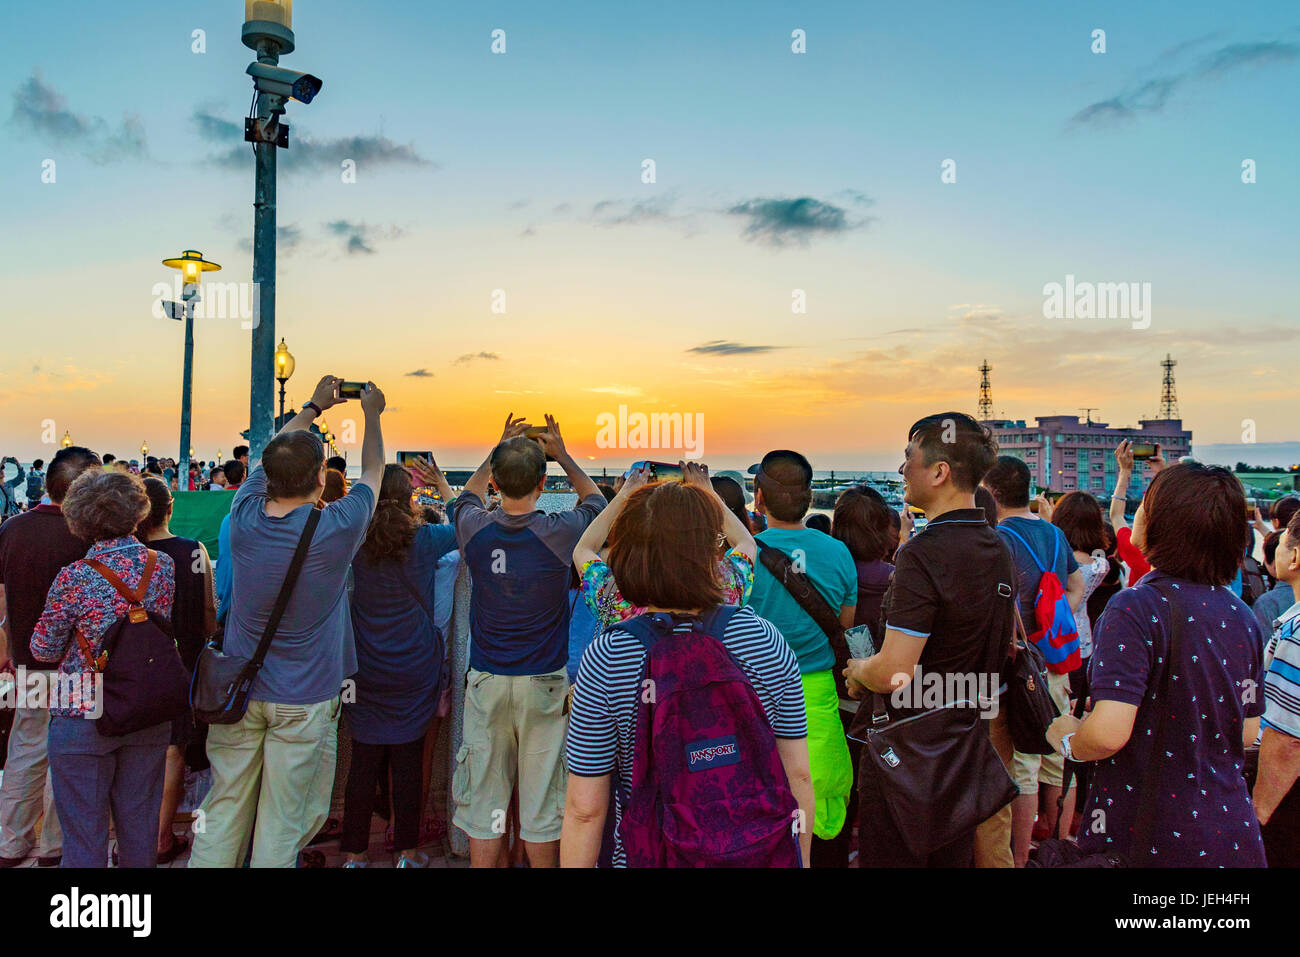 TAIPEI, TAIWAN - MAY 29: Tourists taking photos of the sunset from a pier in the Fisherman's Wharf area of Tamsui on May 29, 2017 in Taipei Stock Photo